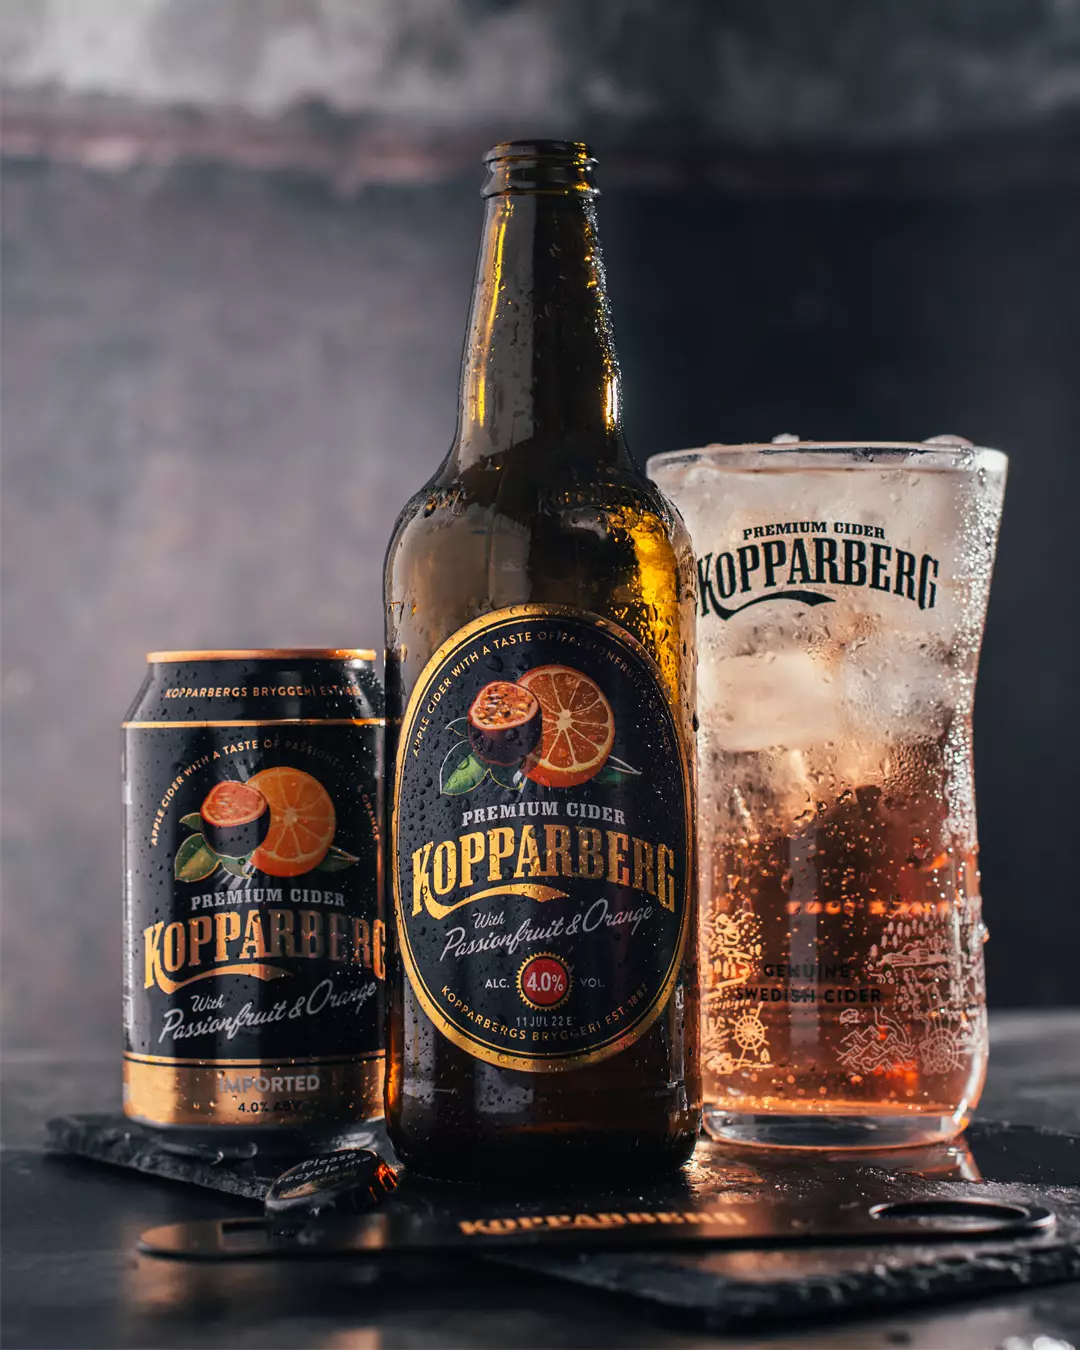 Kopparberg is launching a passionfruit and orange flavoured cider (